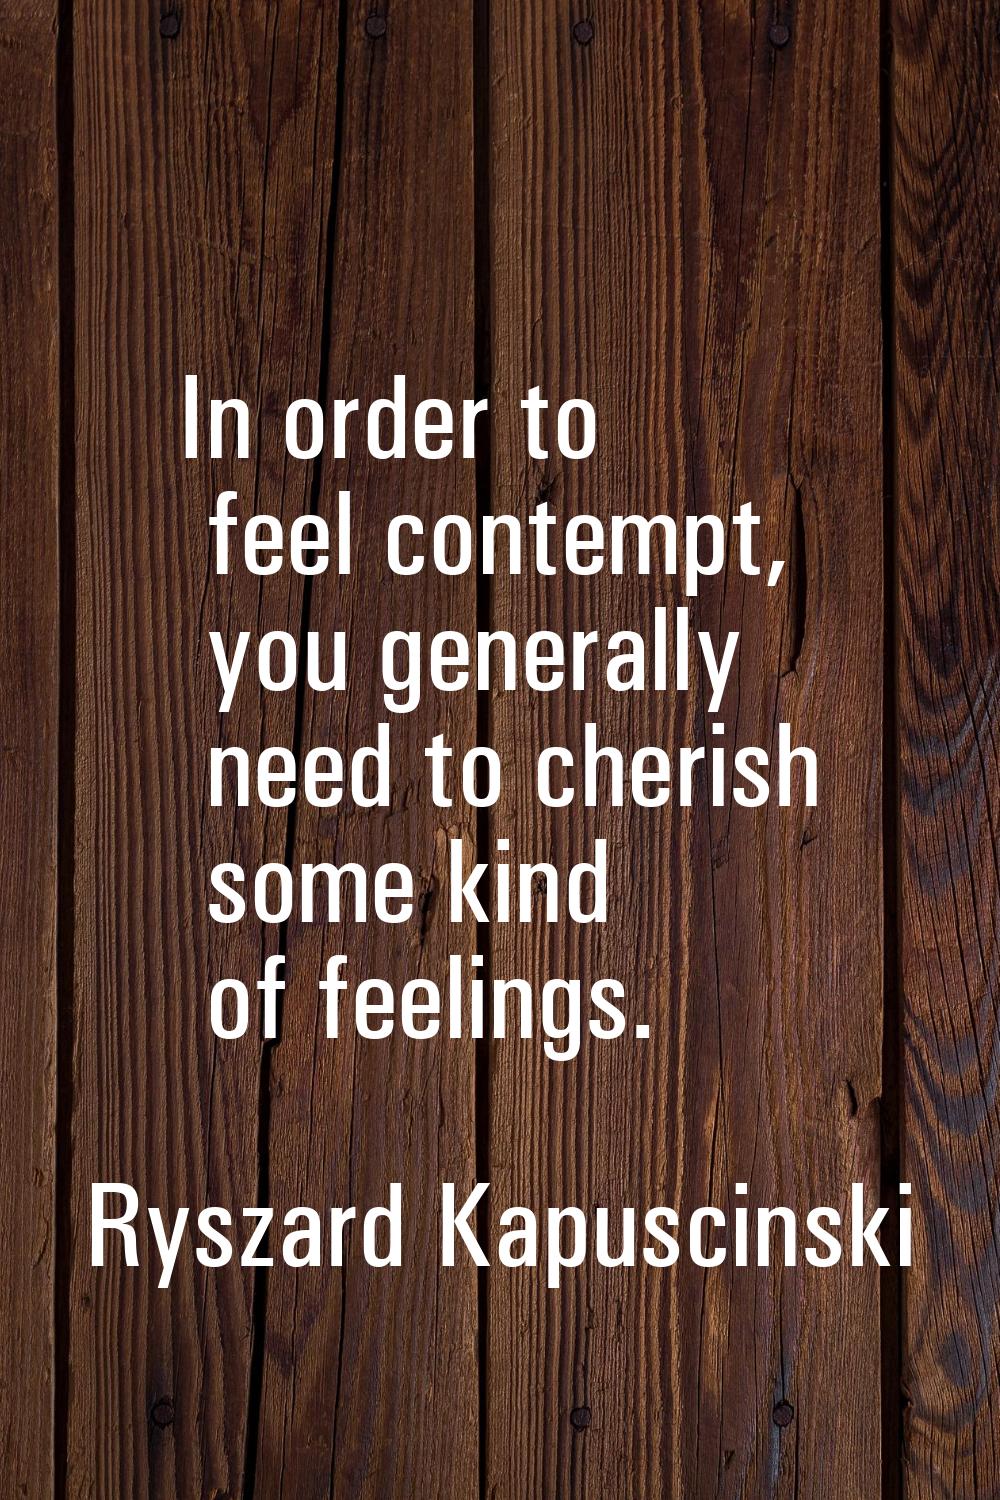 In order to feel contempt, you generally need to cherish some kind of feelings.